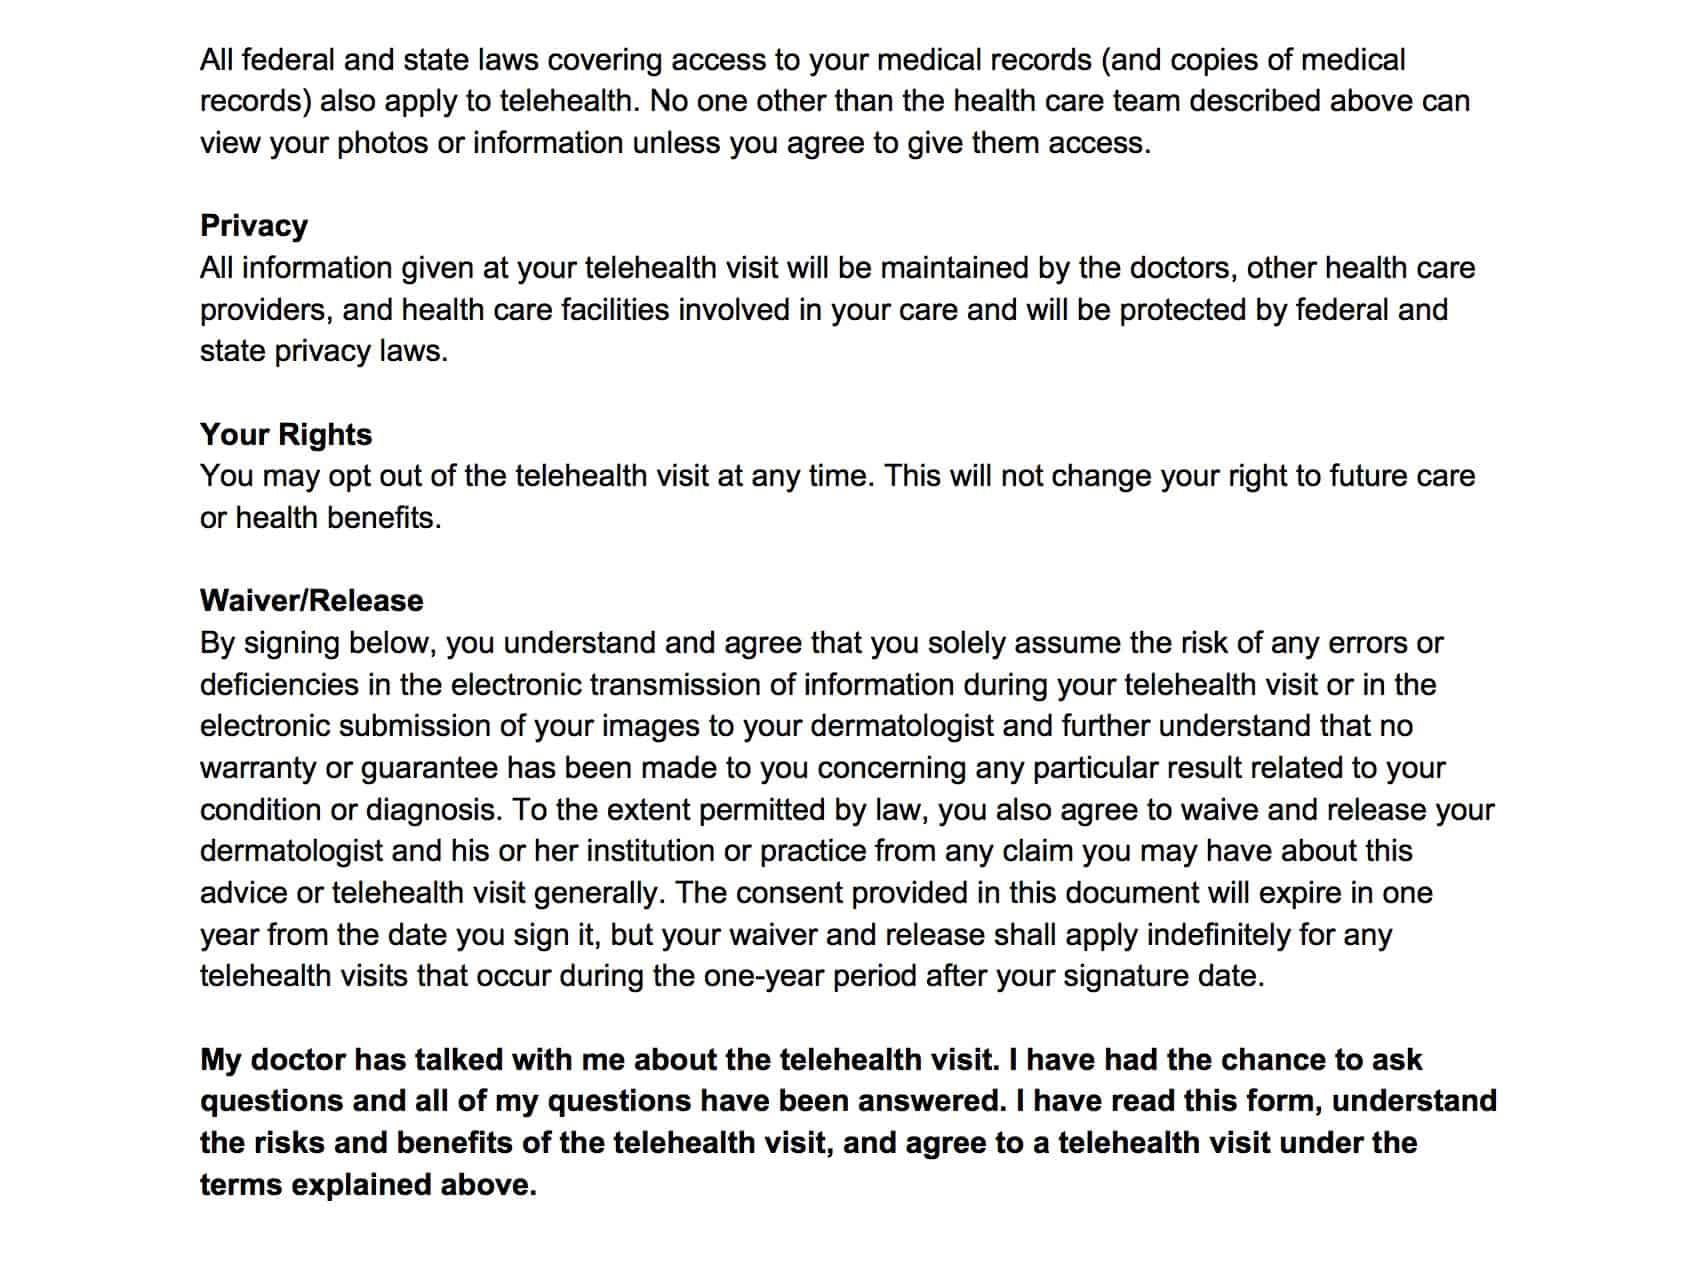 Text second part: Consent to Telehealth Visit